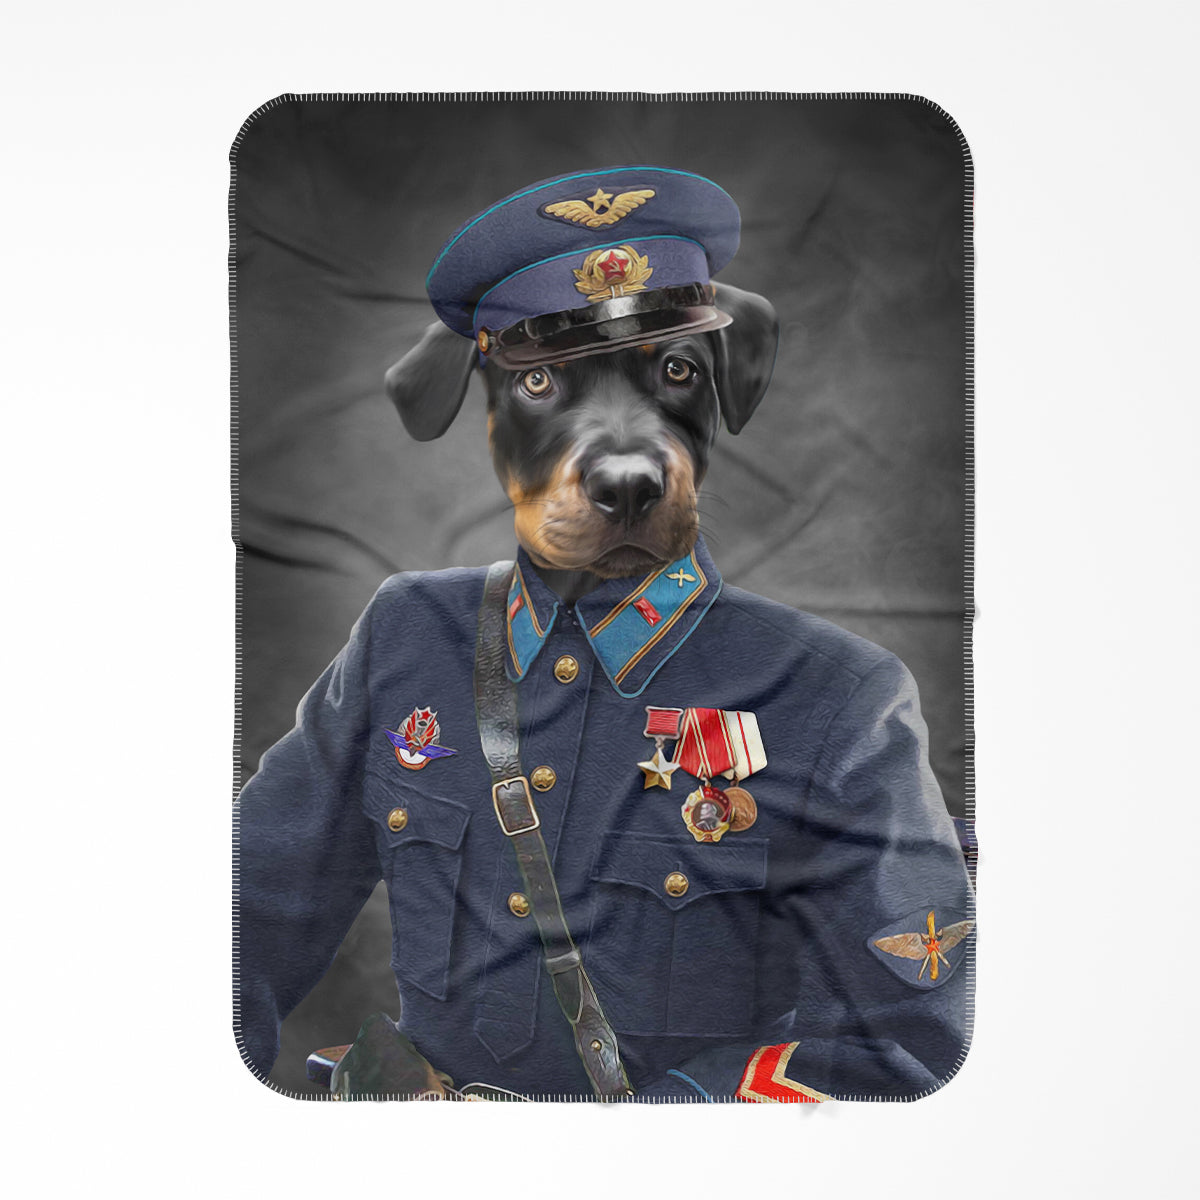 The Decorated Soldier: Custom Pet Blanket